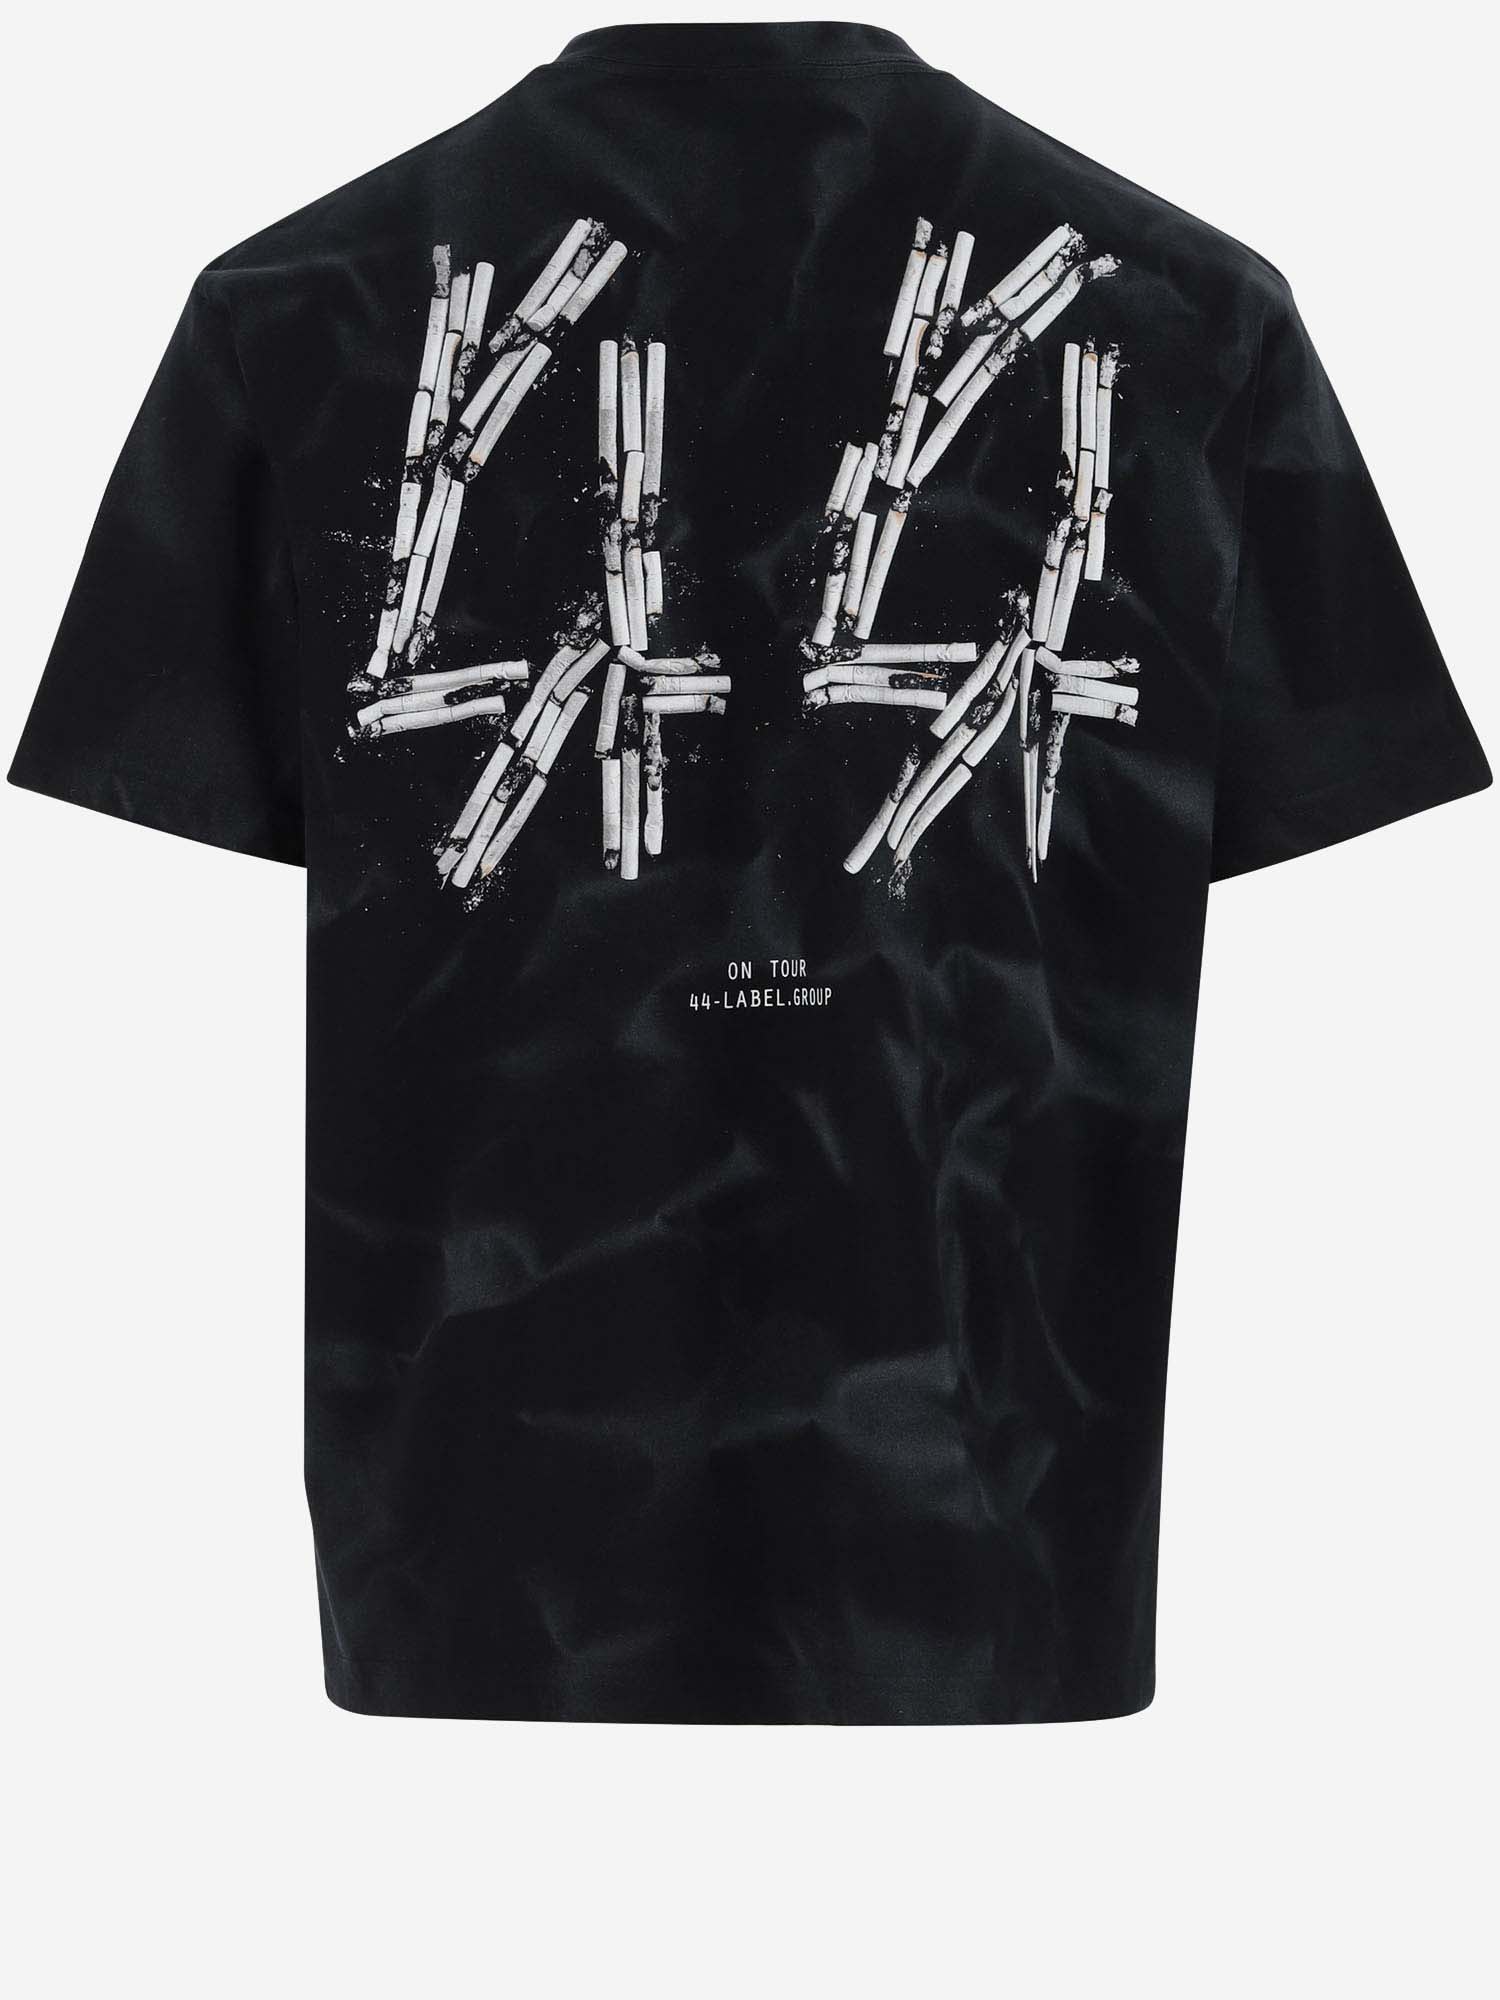 Shop 44 Label Group Cotton T-shirt With Graphic Print And Logo T-shirt In Black